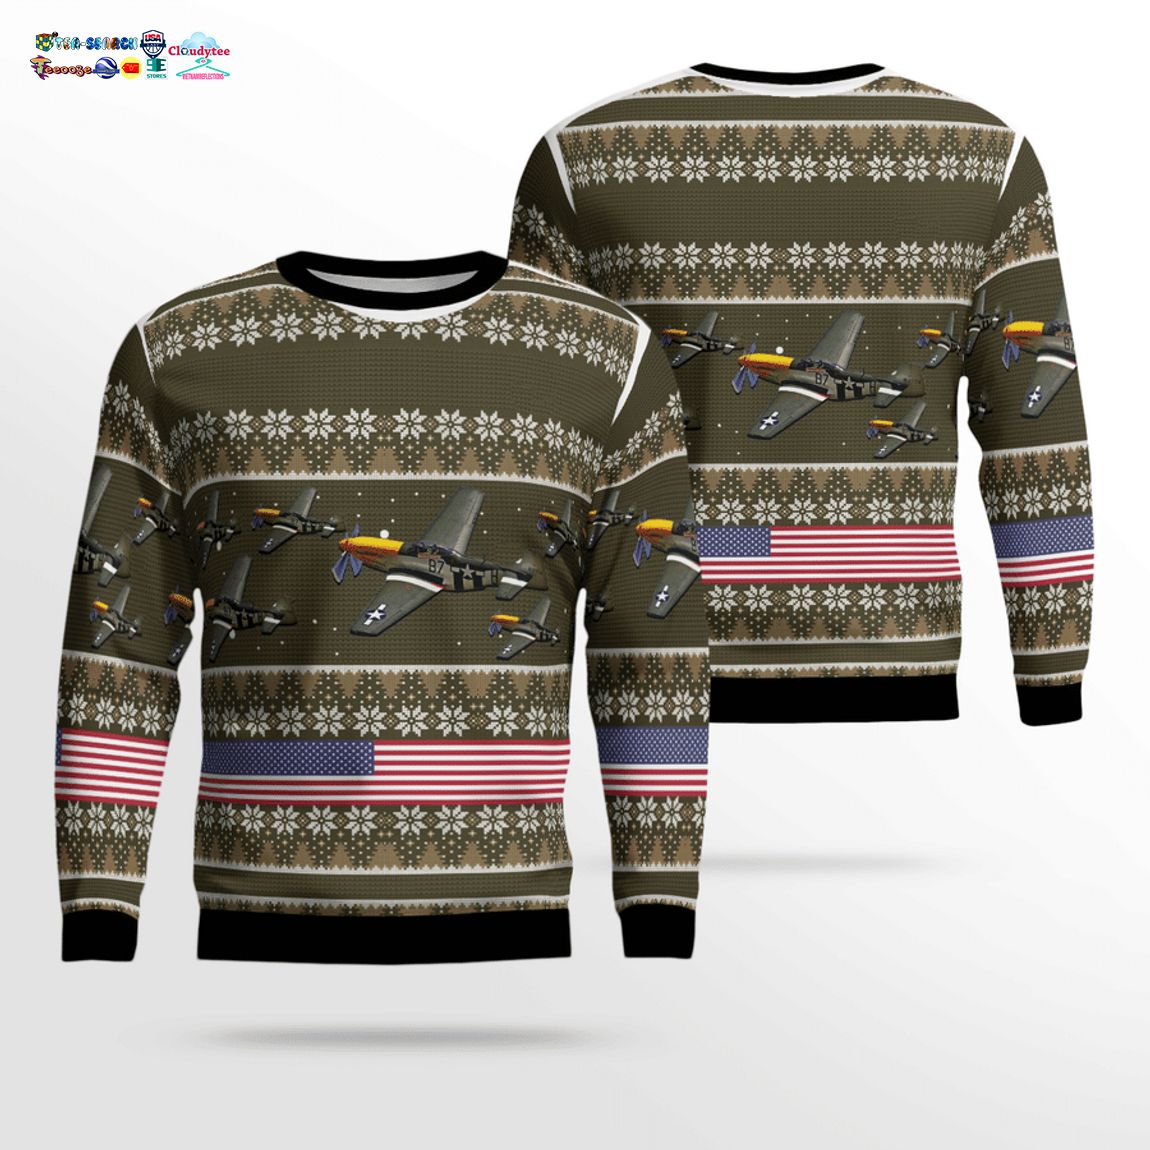 North American P-51 Mustang 3D Christmas Sweater - Is this your new friend?